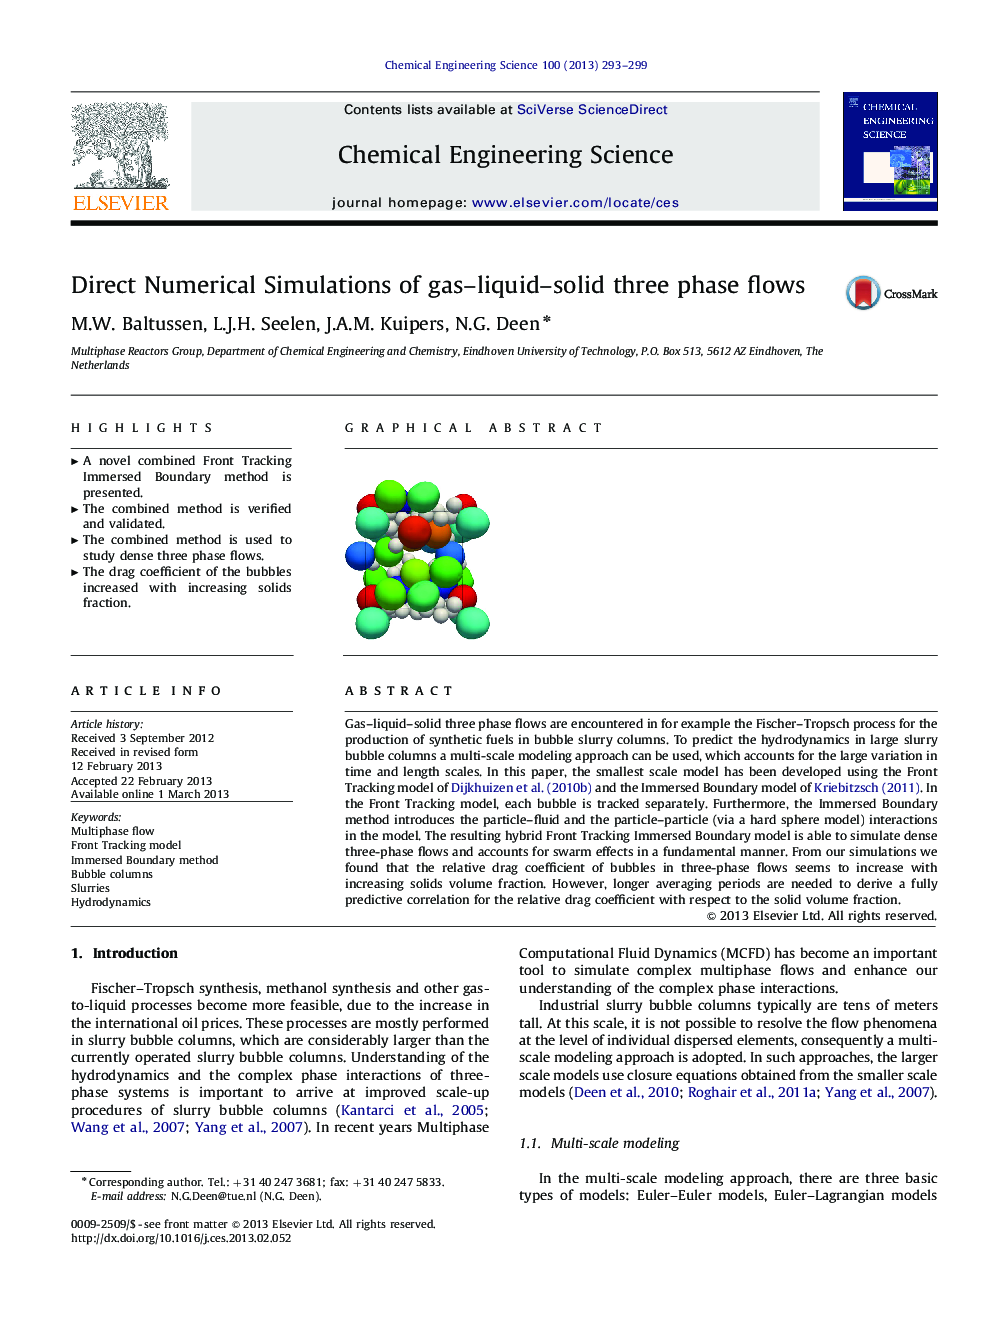 Direct Numerical Simulations of gas–liquid–solid three phase flows